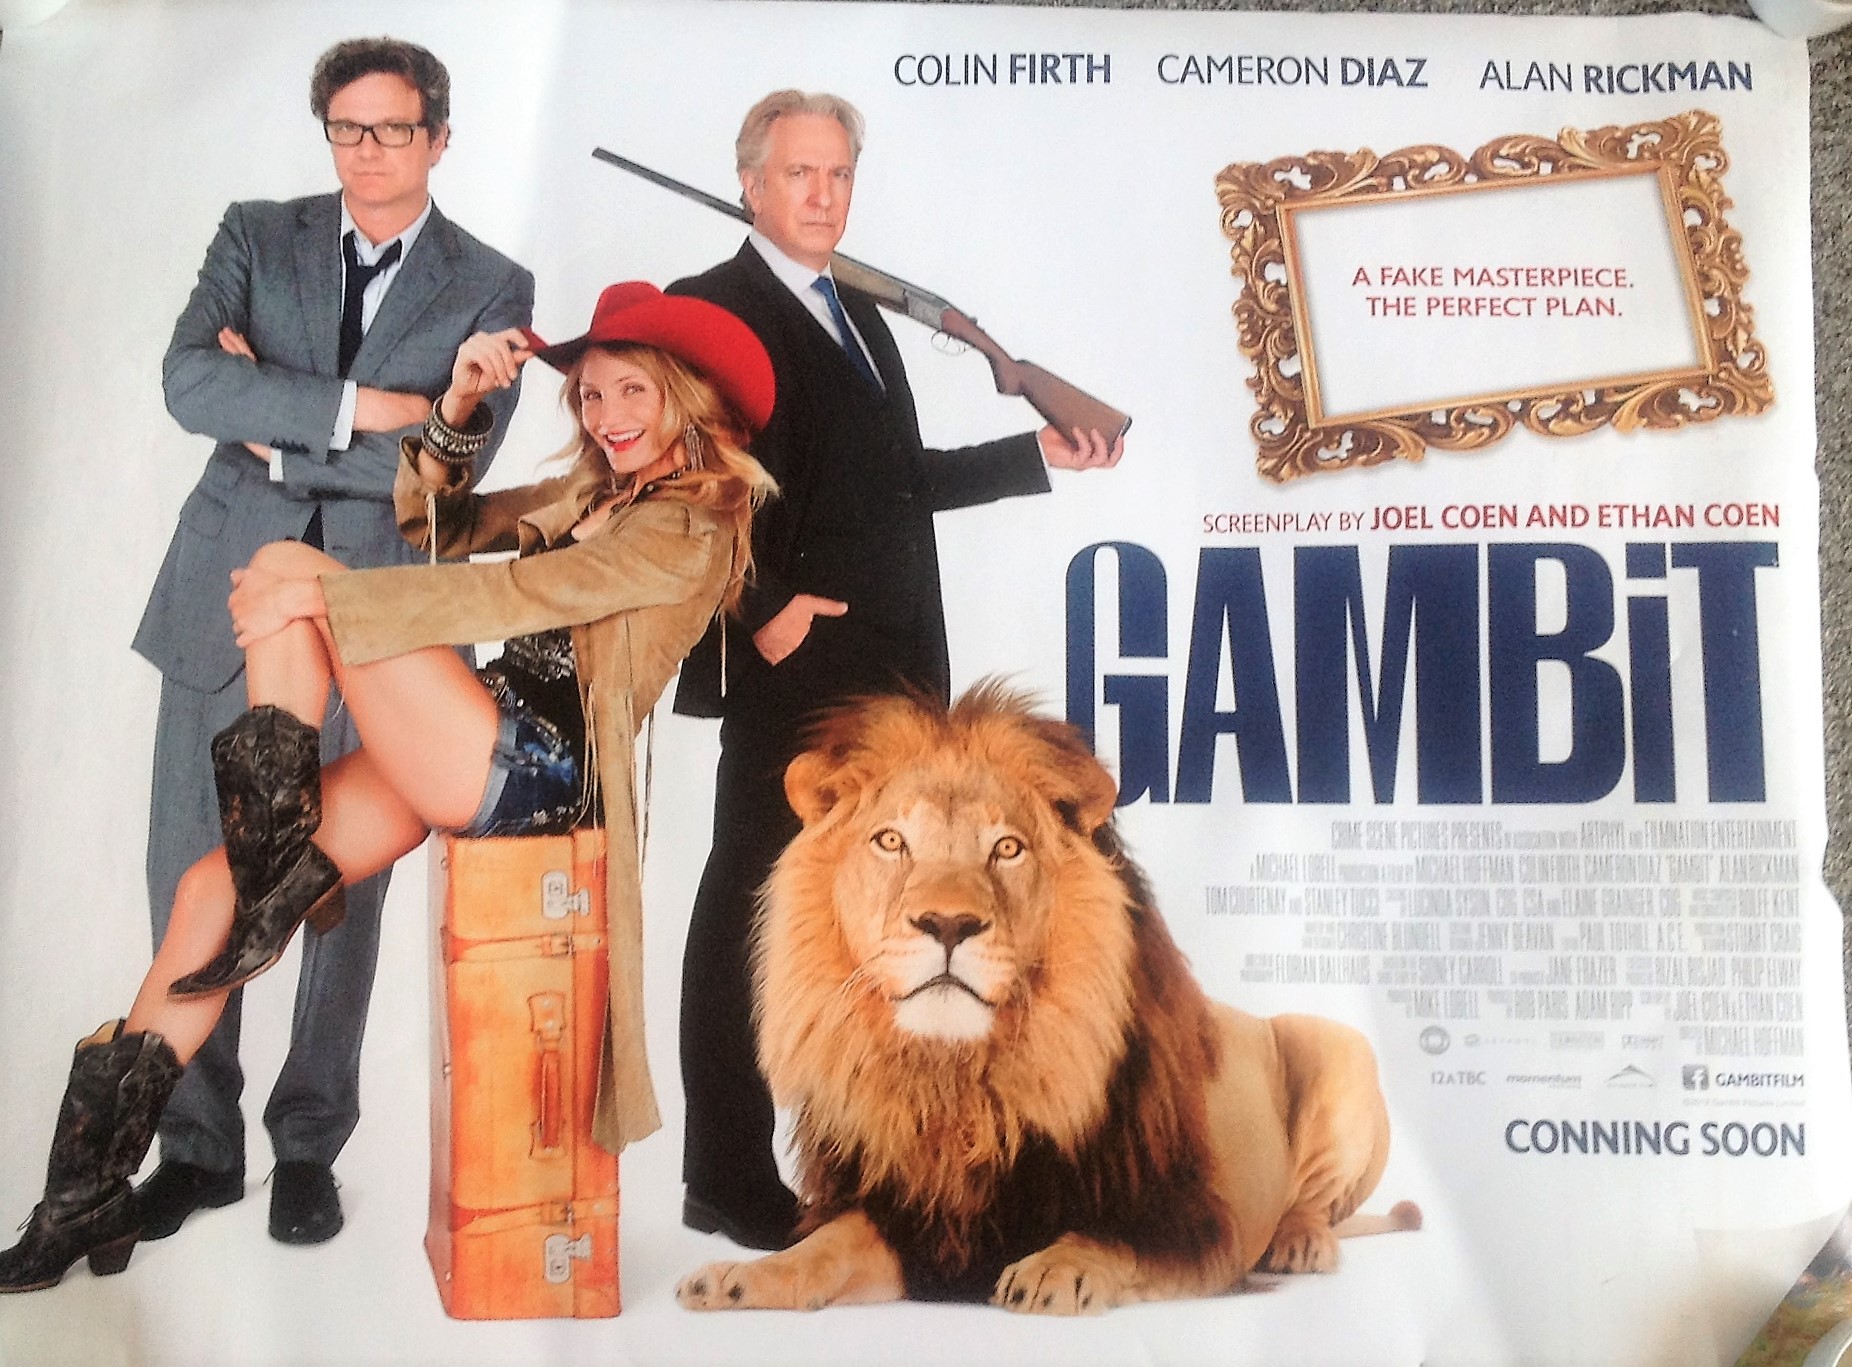 Gambit 40x30 movie poster 2012 film directed by Michael Hoffman, starring Colin Firth, Cameron Diaz,